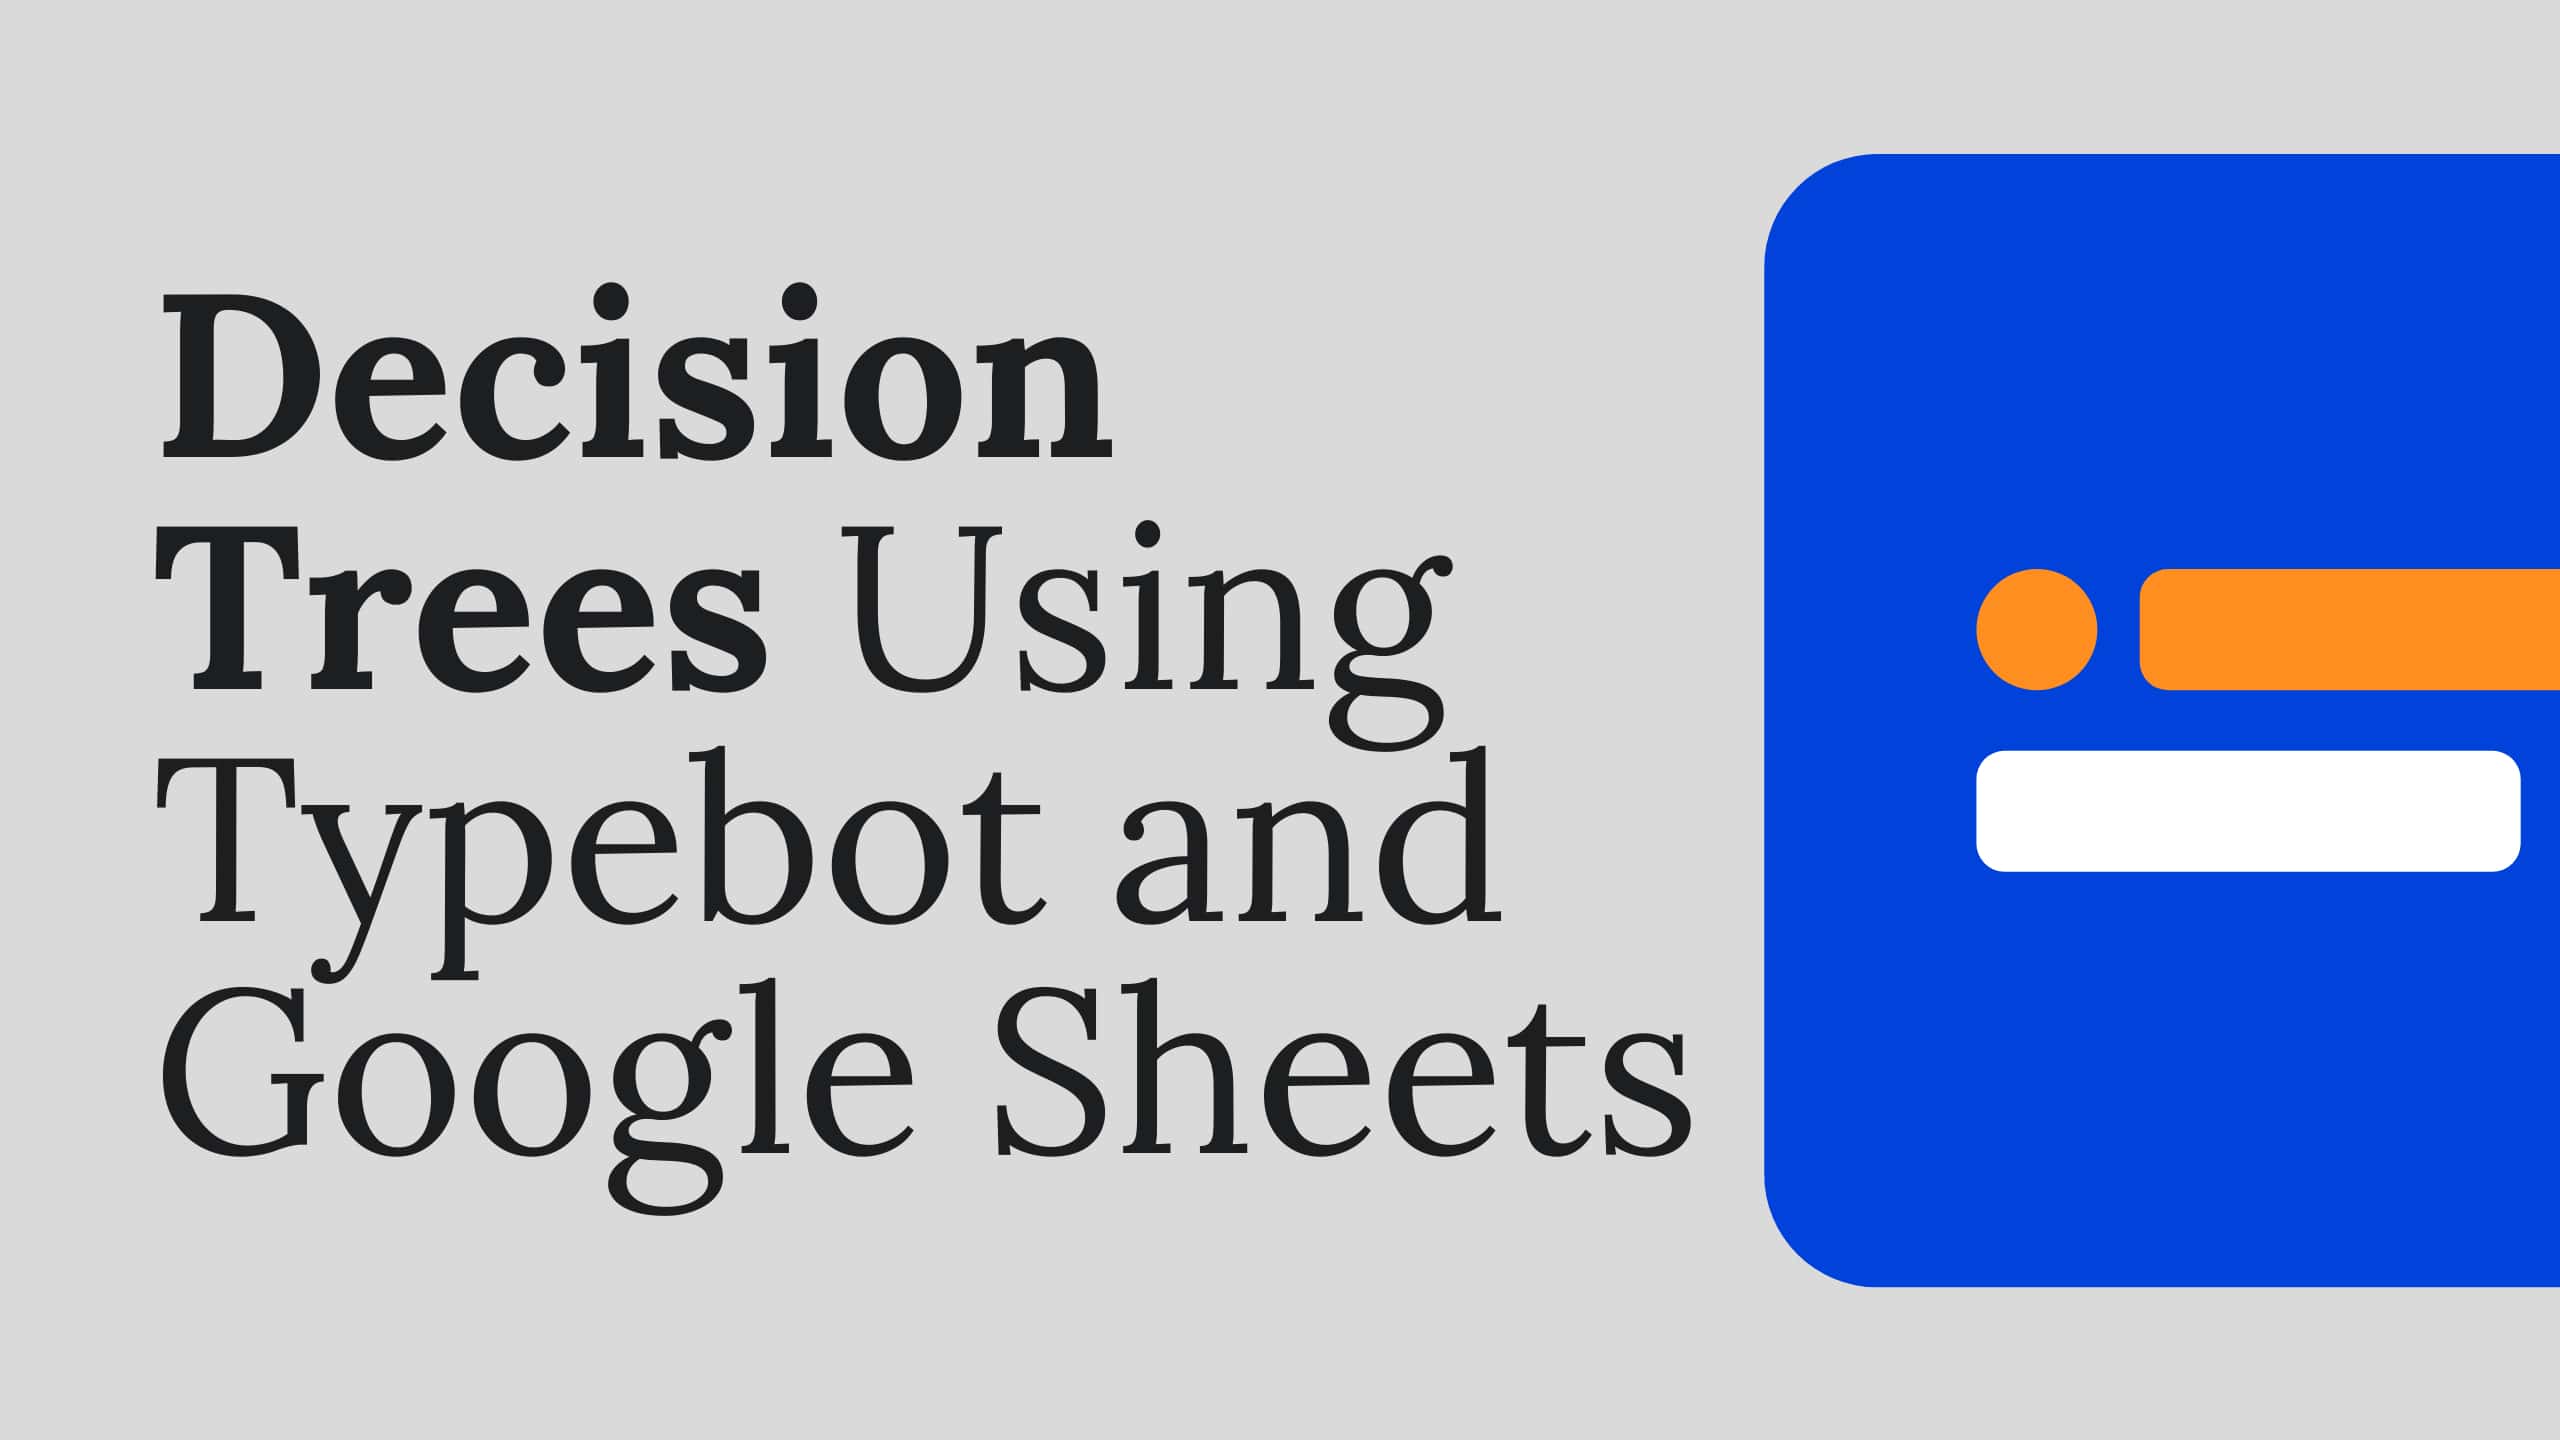 Create a Decision Tree with Typebot and Google Sheets